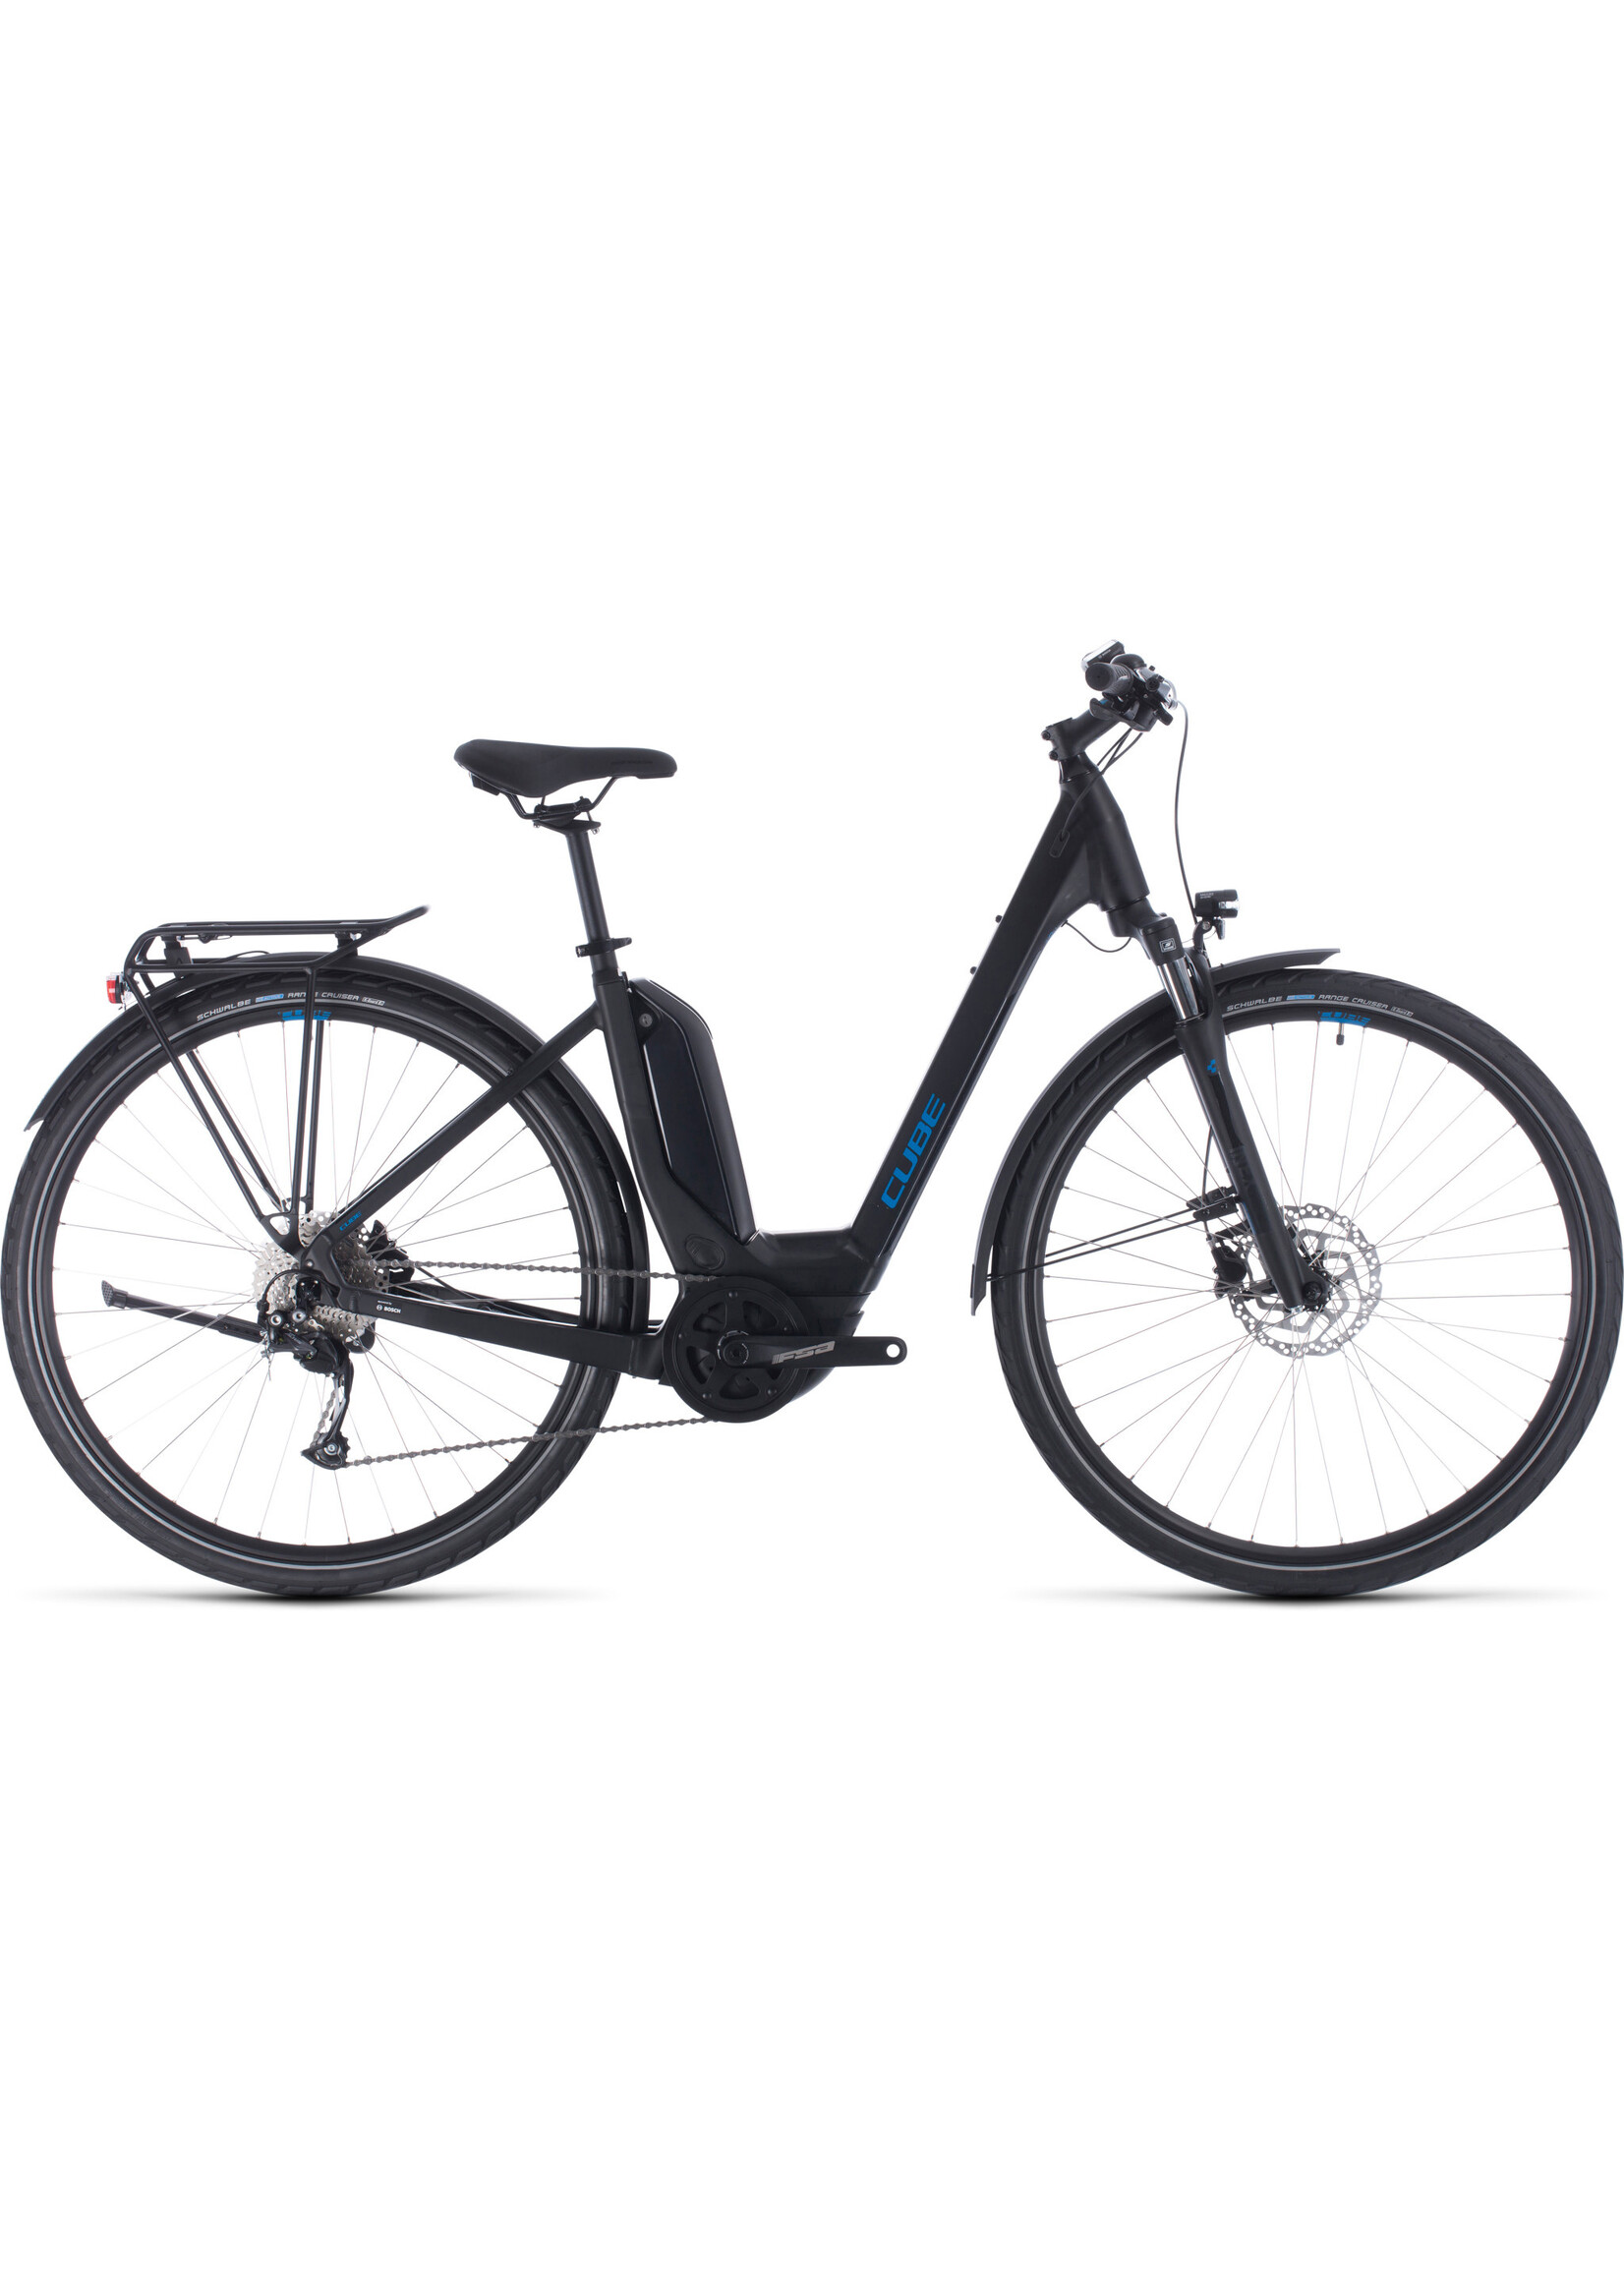 CUBE OCCASION - Cube Touring Hybrid ONE 500 2020 black'n'blue 54cm easy entry